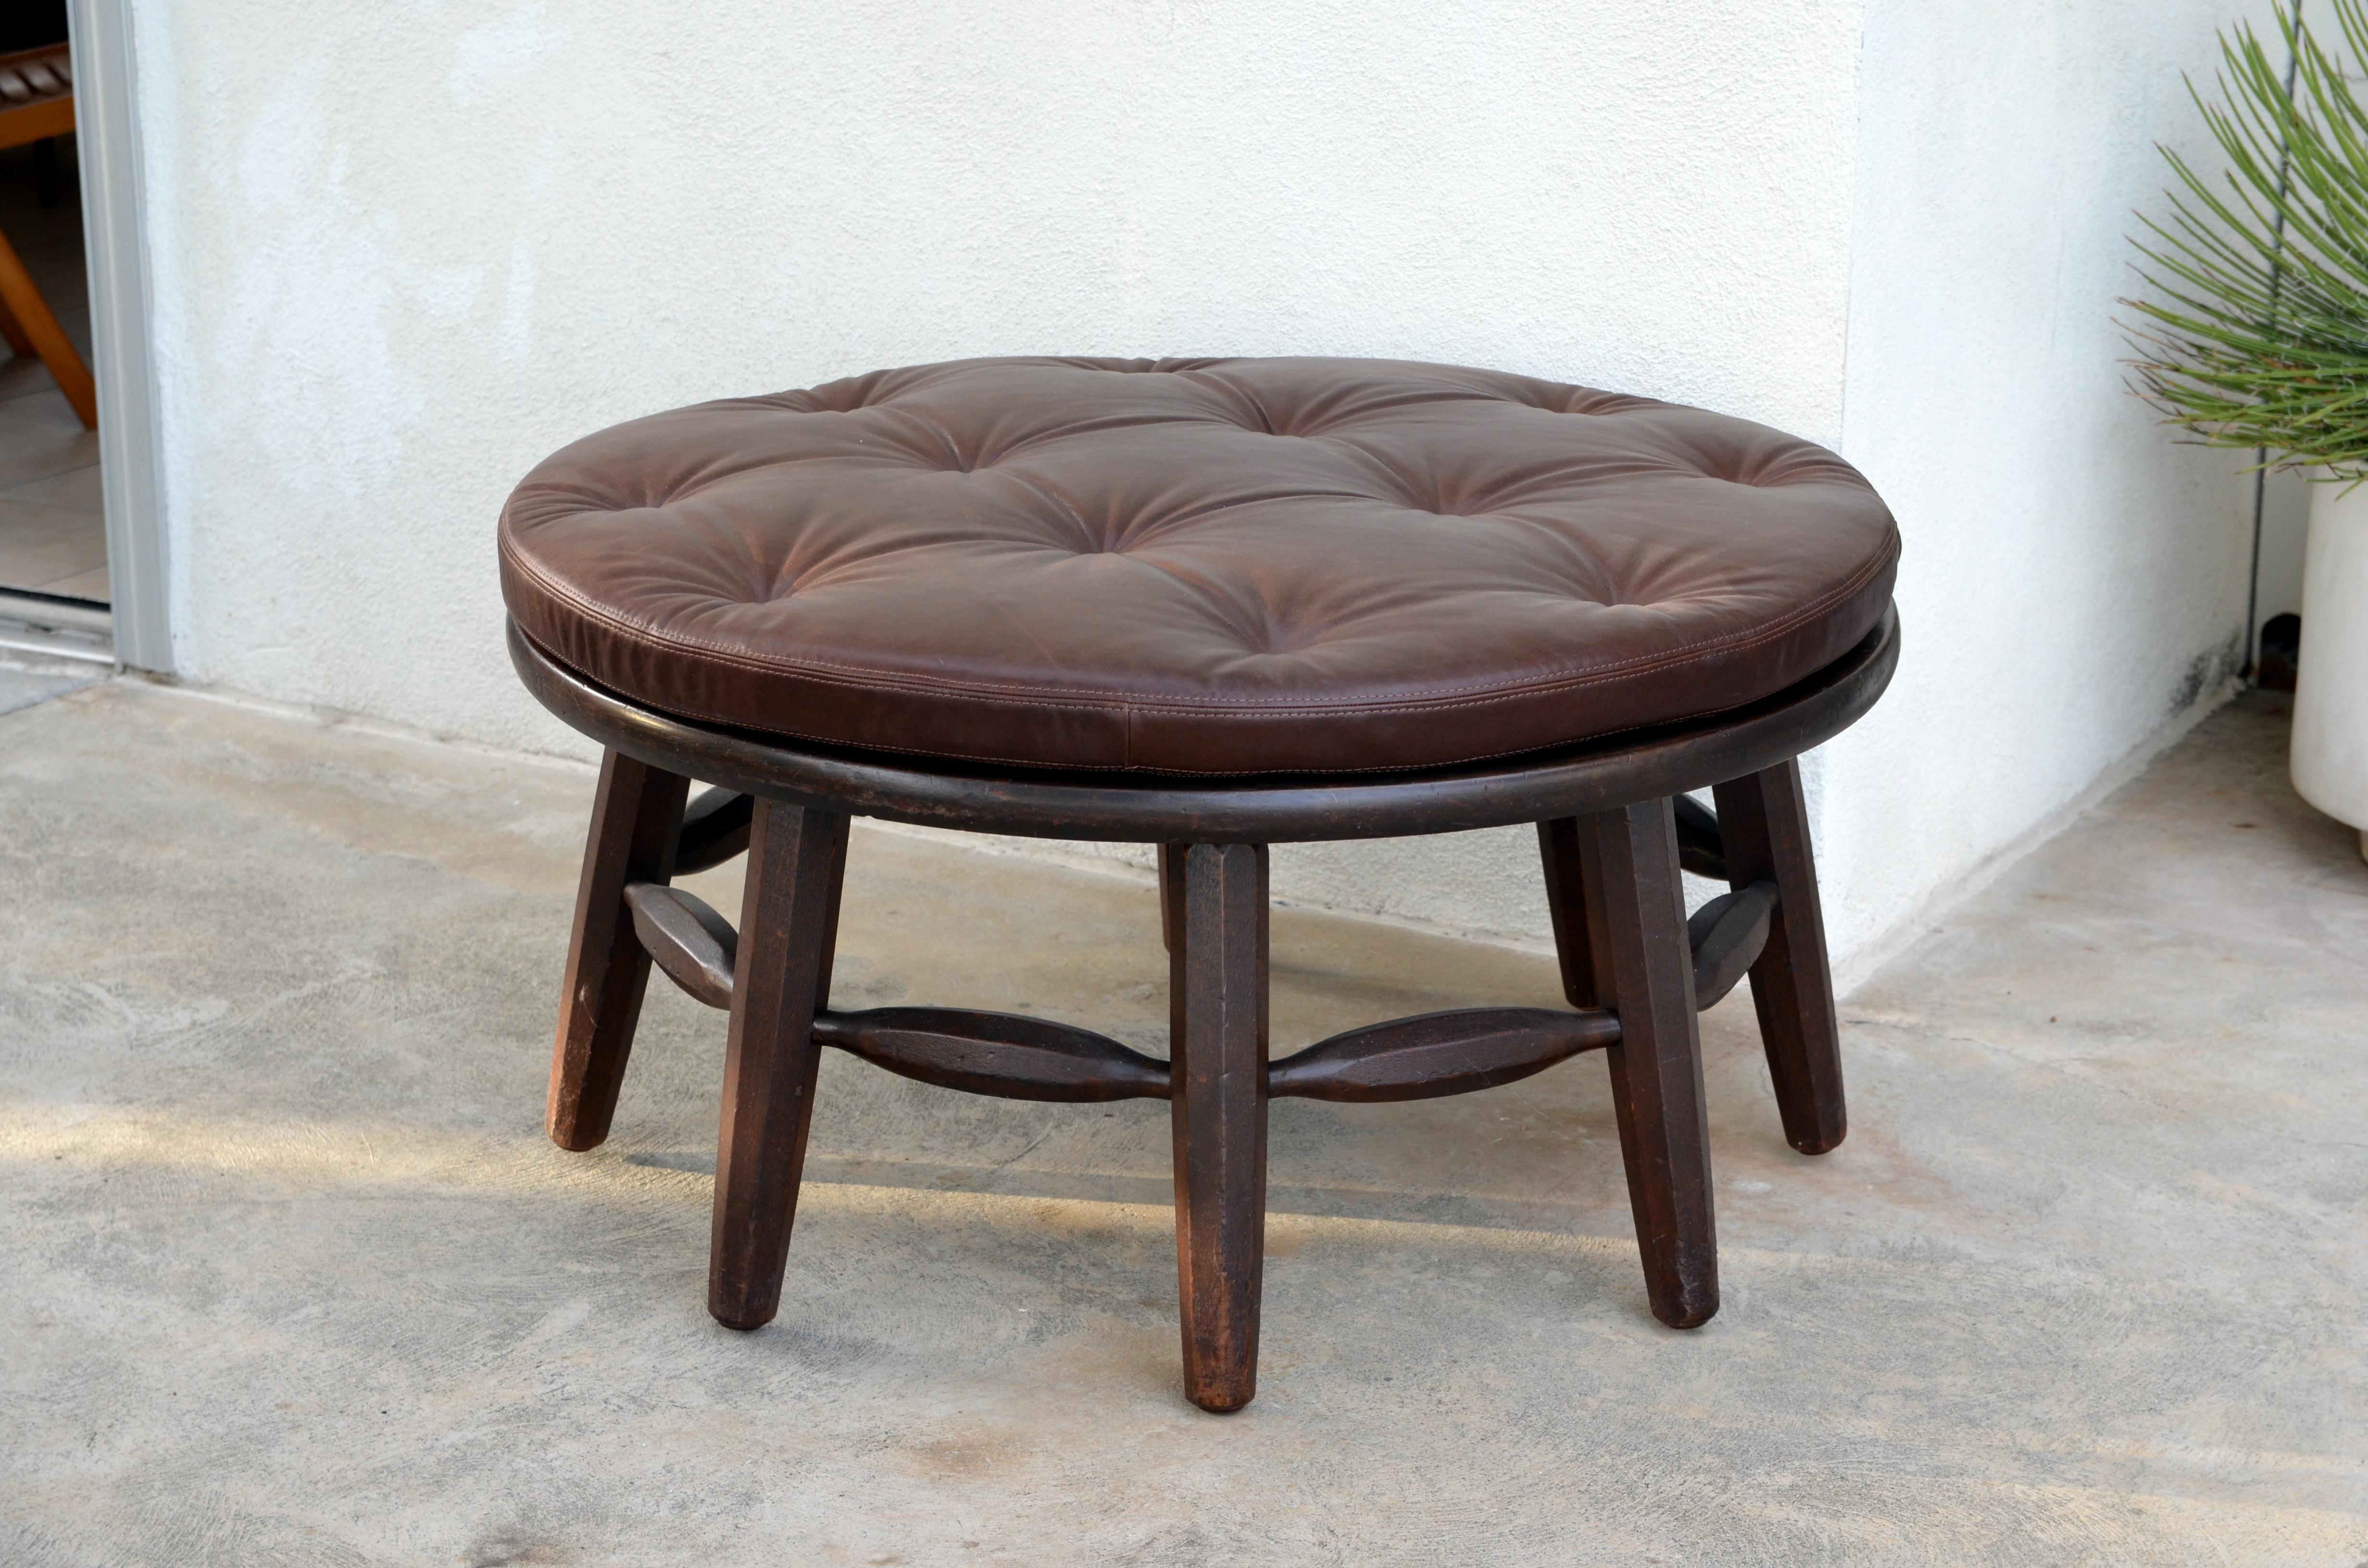 Leather Rare Original Round Monterey Coffee Table or Ottoman, Signed